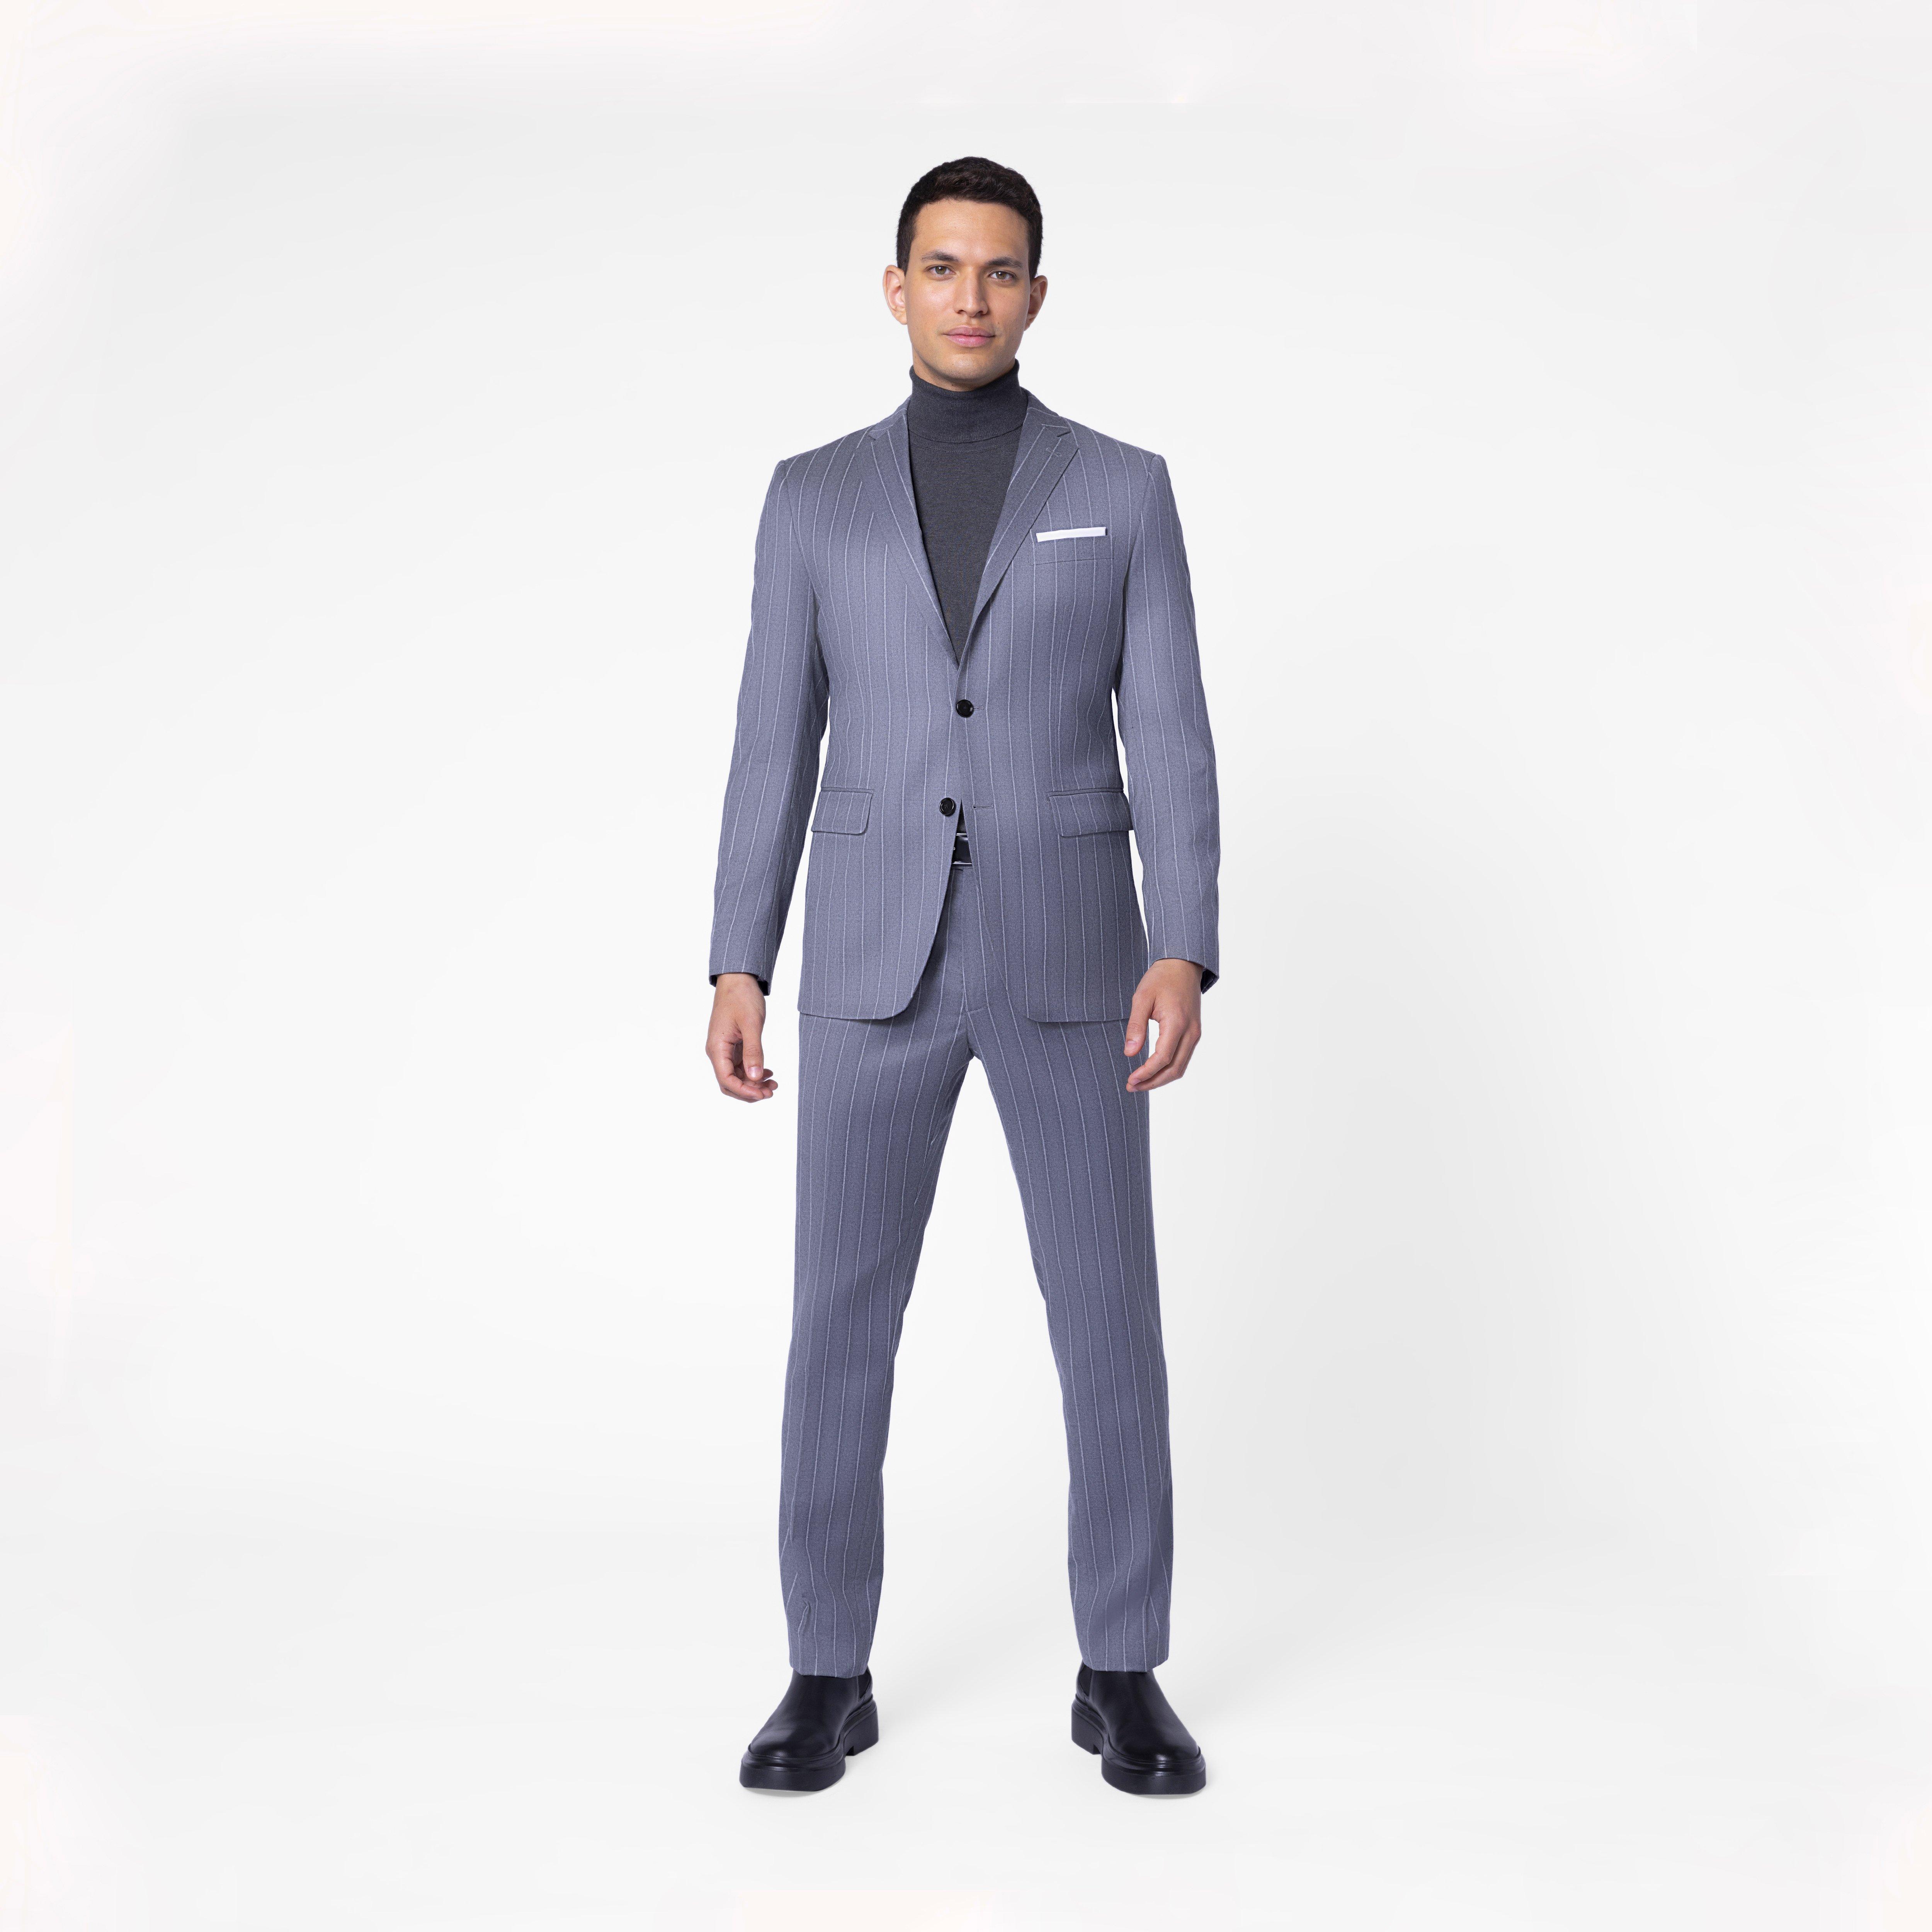 Pini Parma - Can a striped suit can be bold and elegant at the same time?  We think yes, what do you think? Here our grey stripe flannel suit with  Soragna trousers,